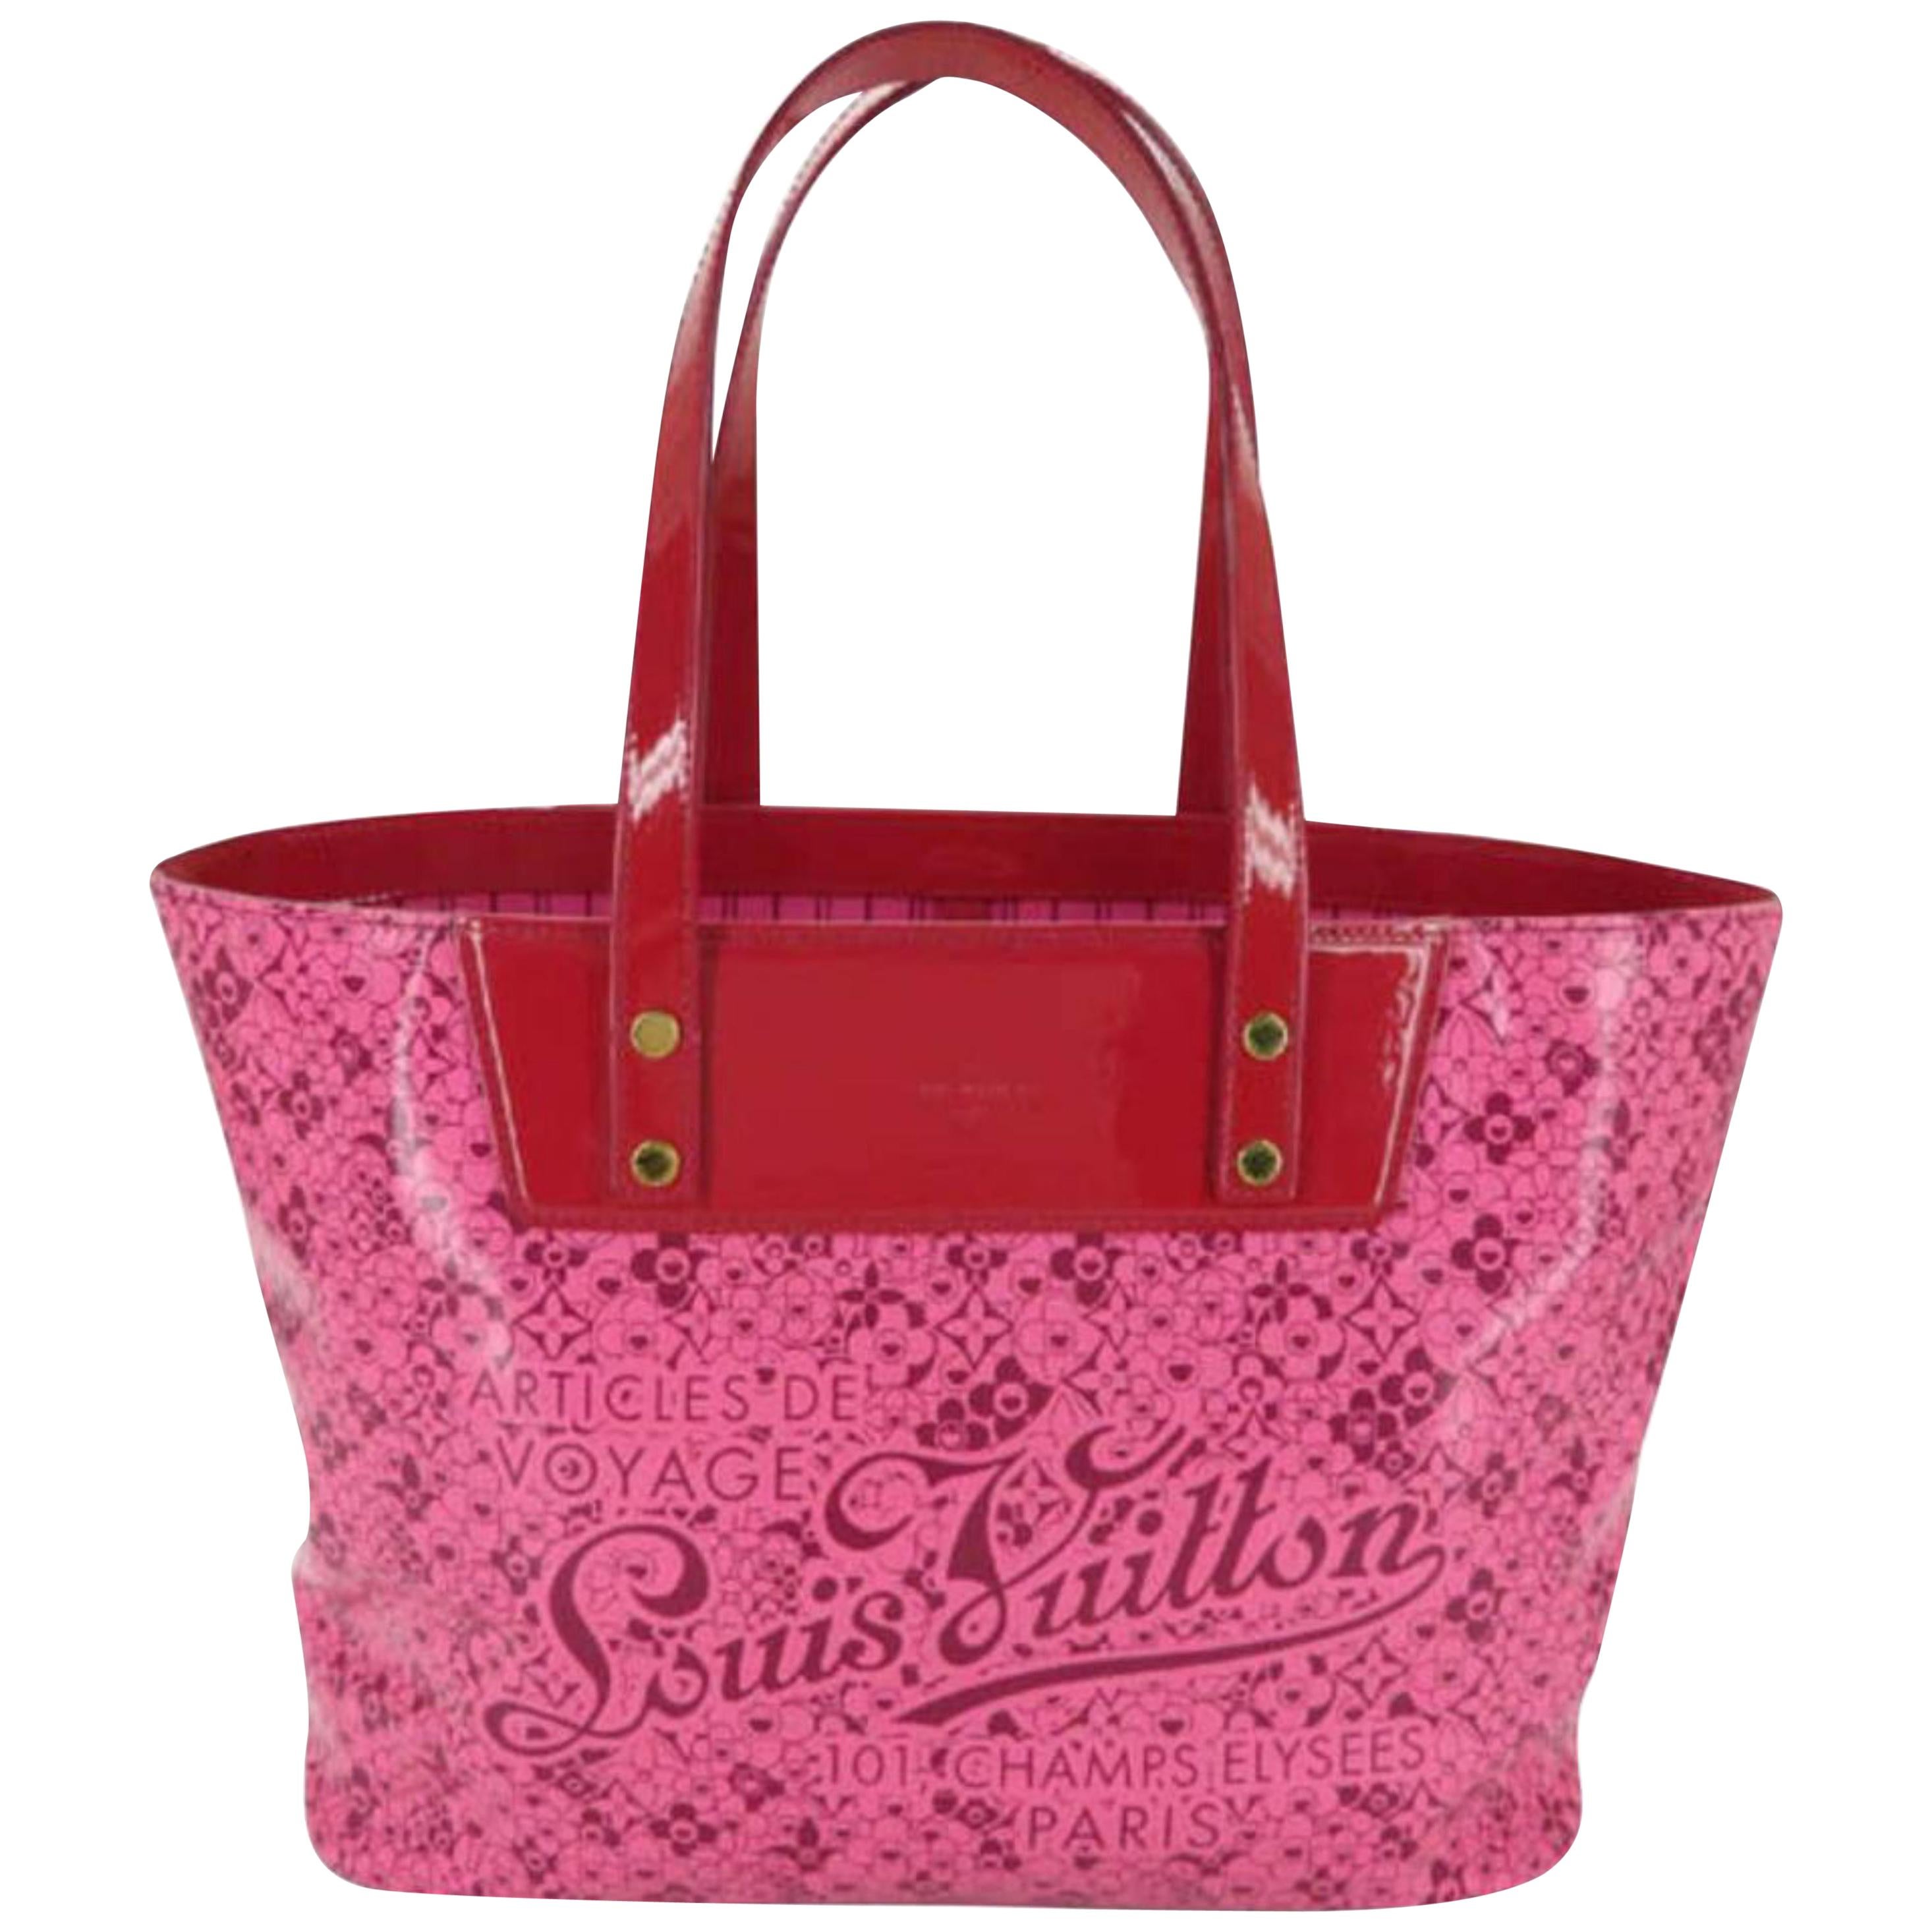 Louis Vuitton Murakami Cosmic Blossom Pm 870012 Pink Leather Tote For Sale